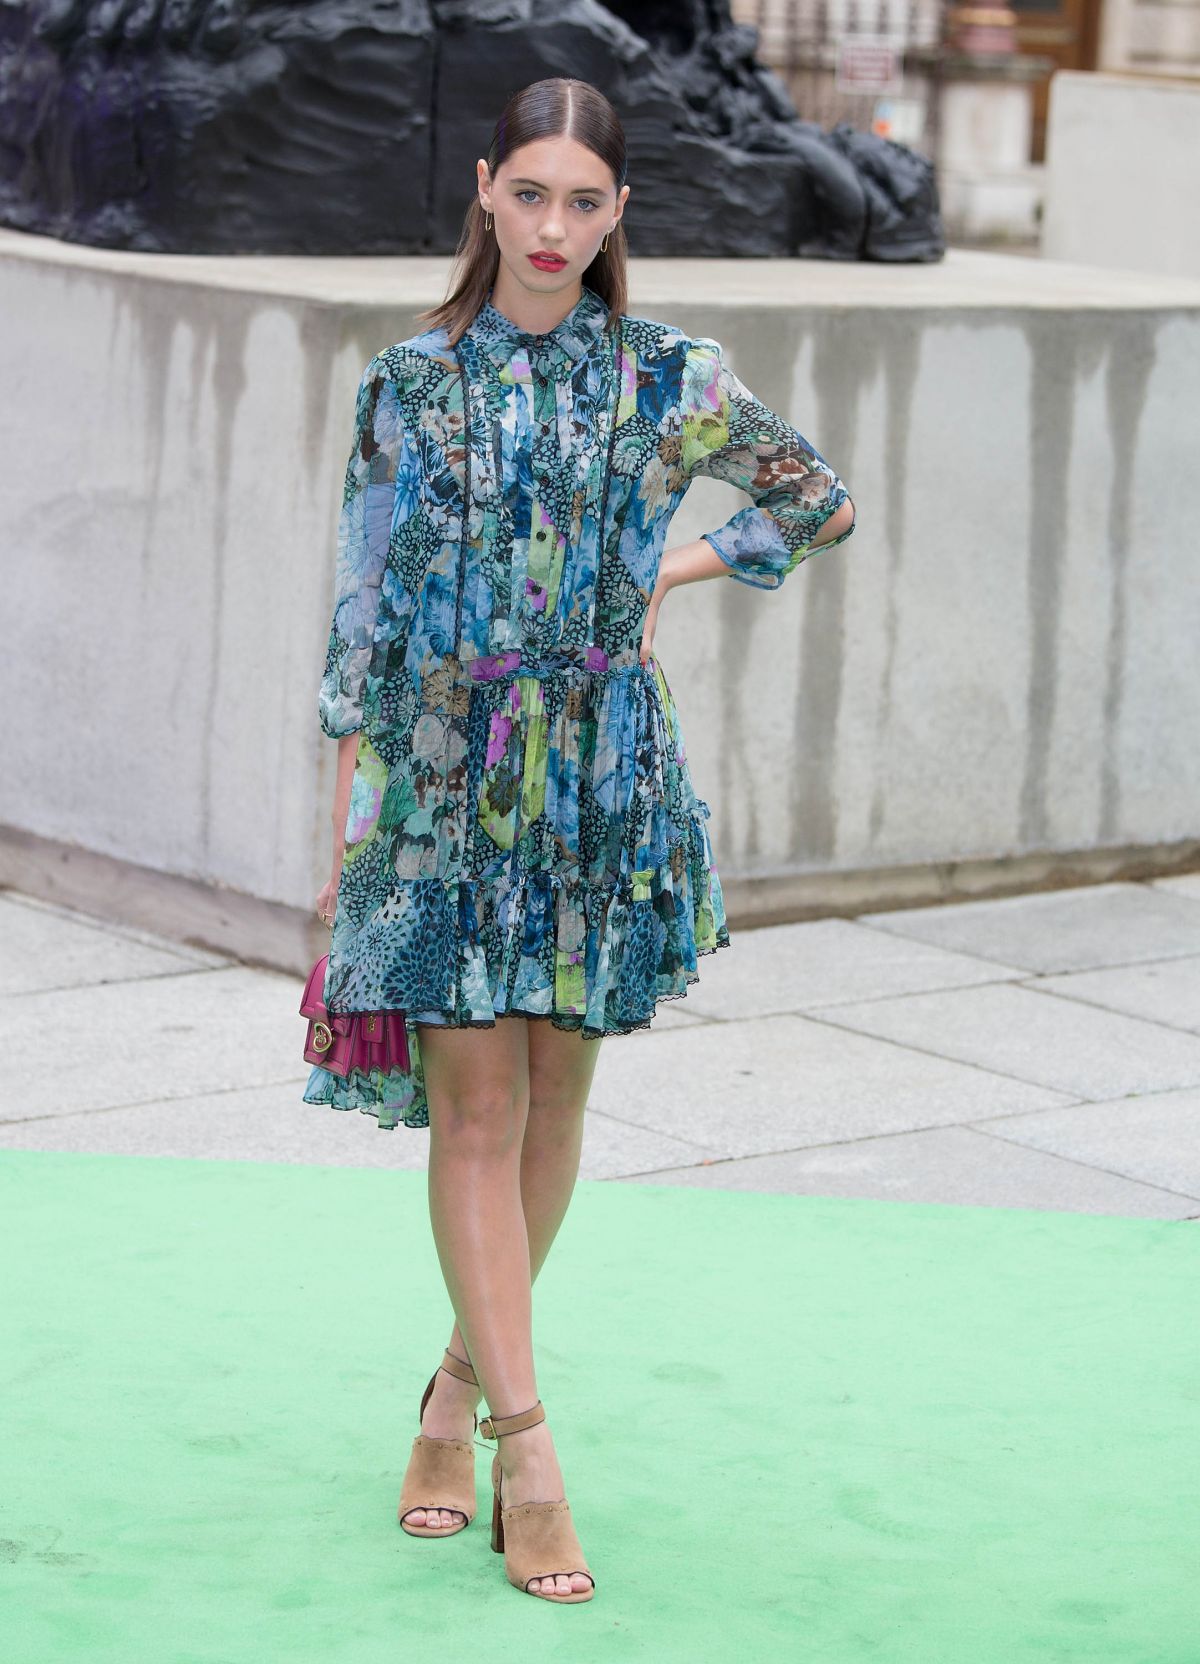 iris-law-at-royal-academy-of-arts-summer-exhibition-preview-party-in-london-06-04-2019-5.jpg